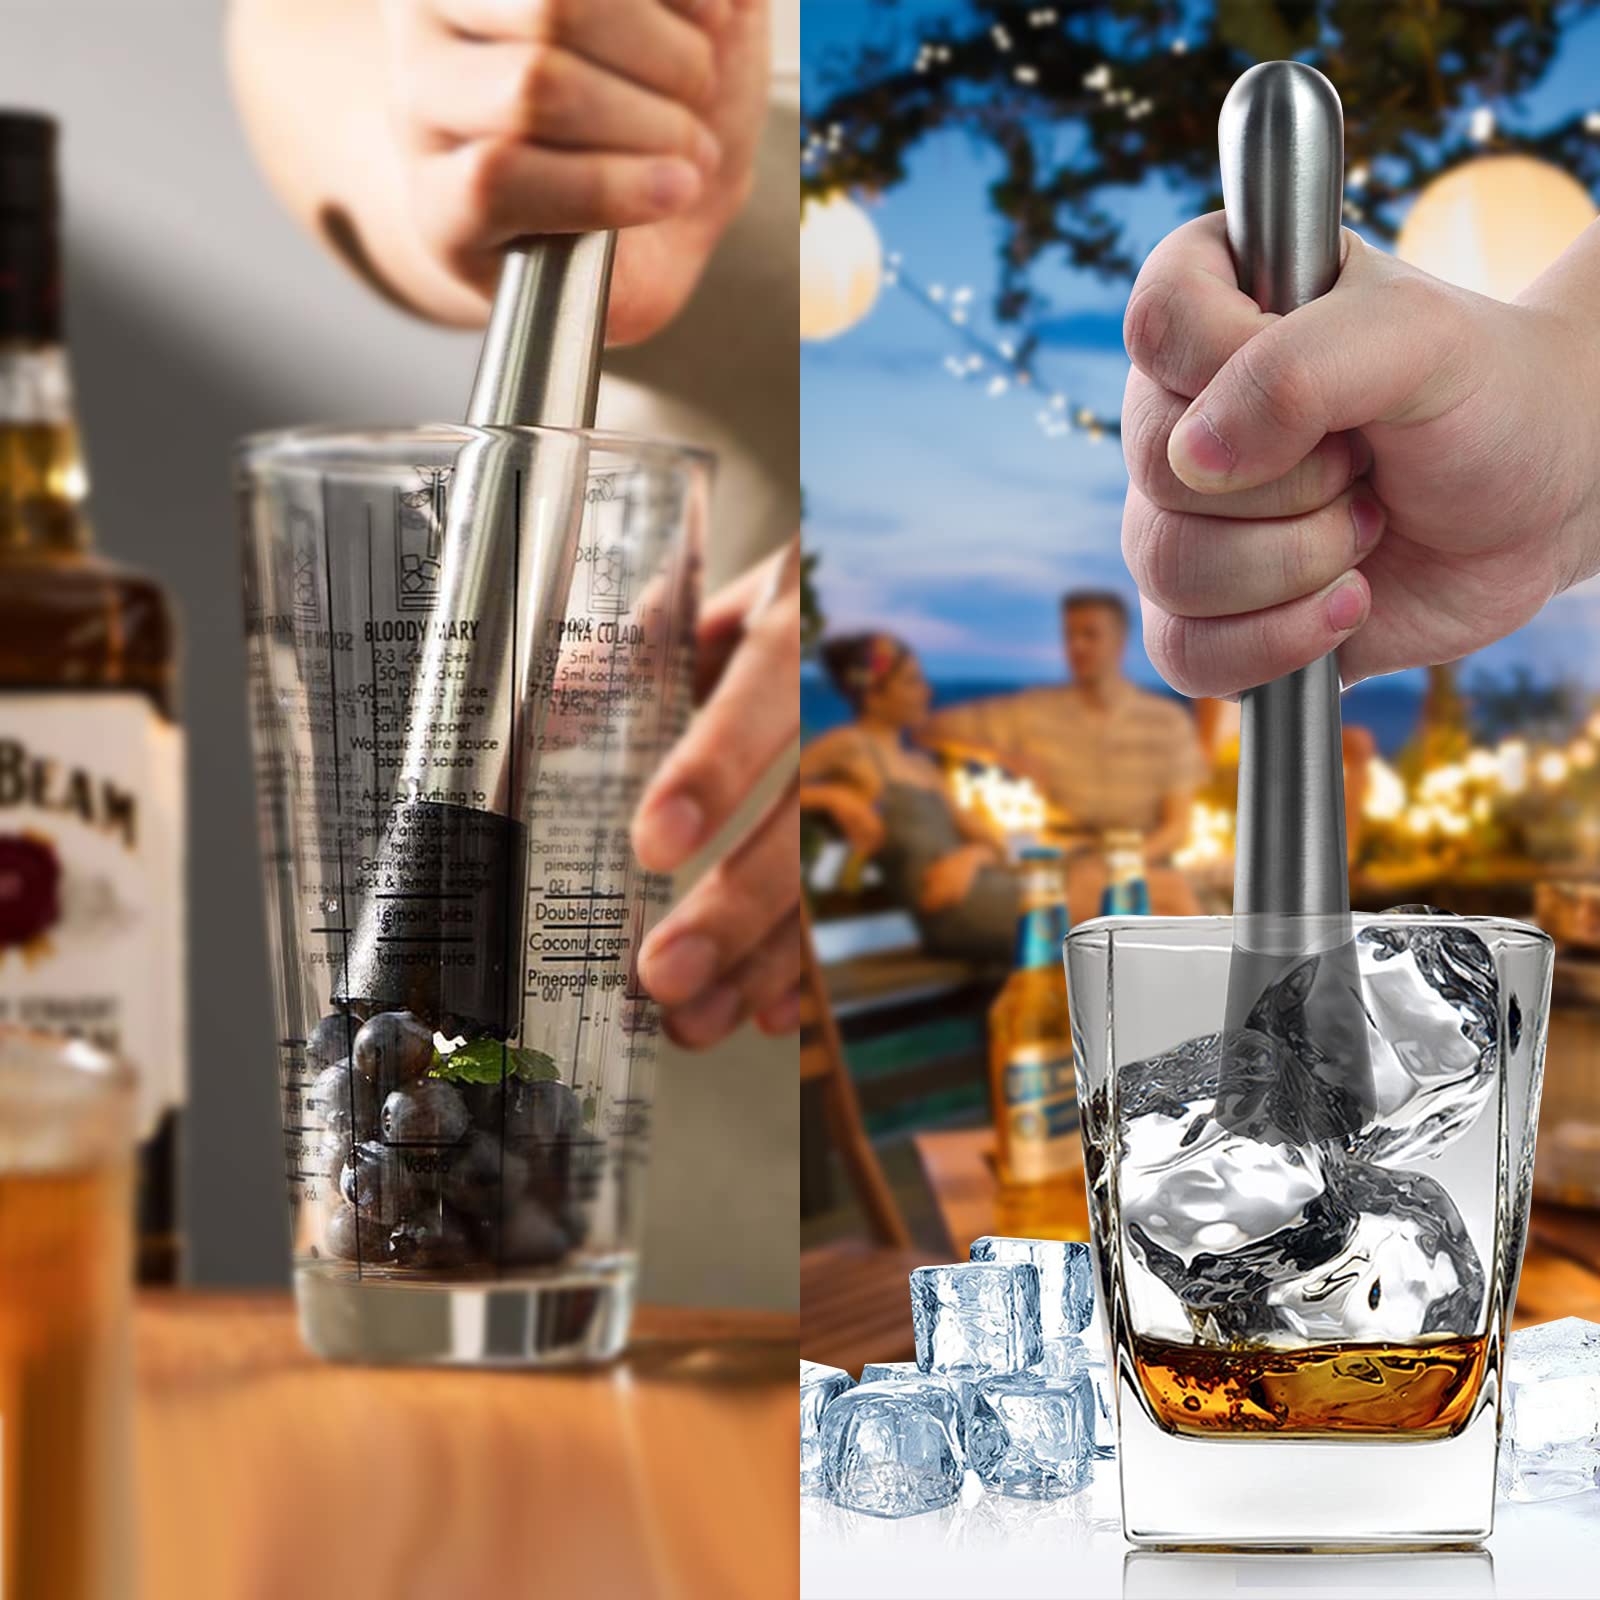 10 inch & 8 inch Stainless Steel Cocktail Muddler with 2 Mixing Spoon, Home Bar Tool Set, for Making & Creating Delicious Mojitos, & Other Fruit Based Drinks & Beverages in Various Containers